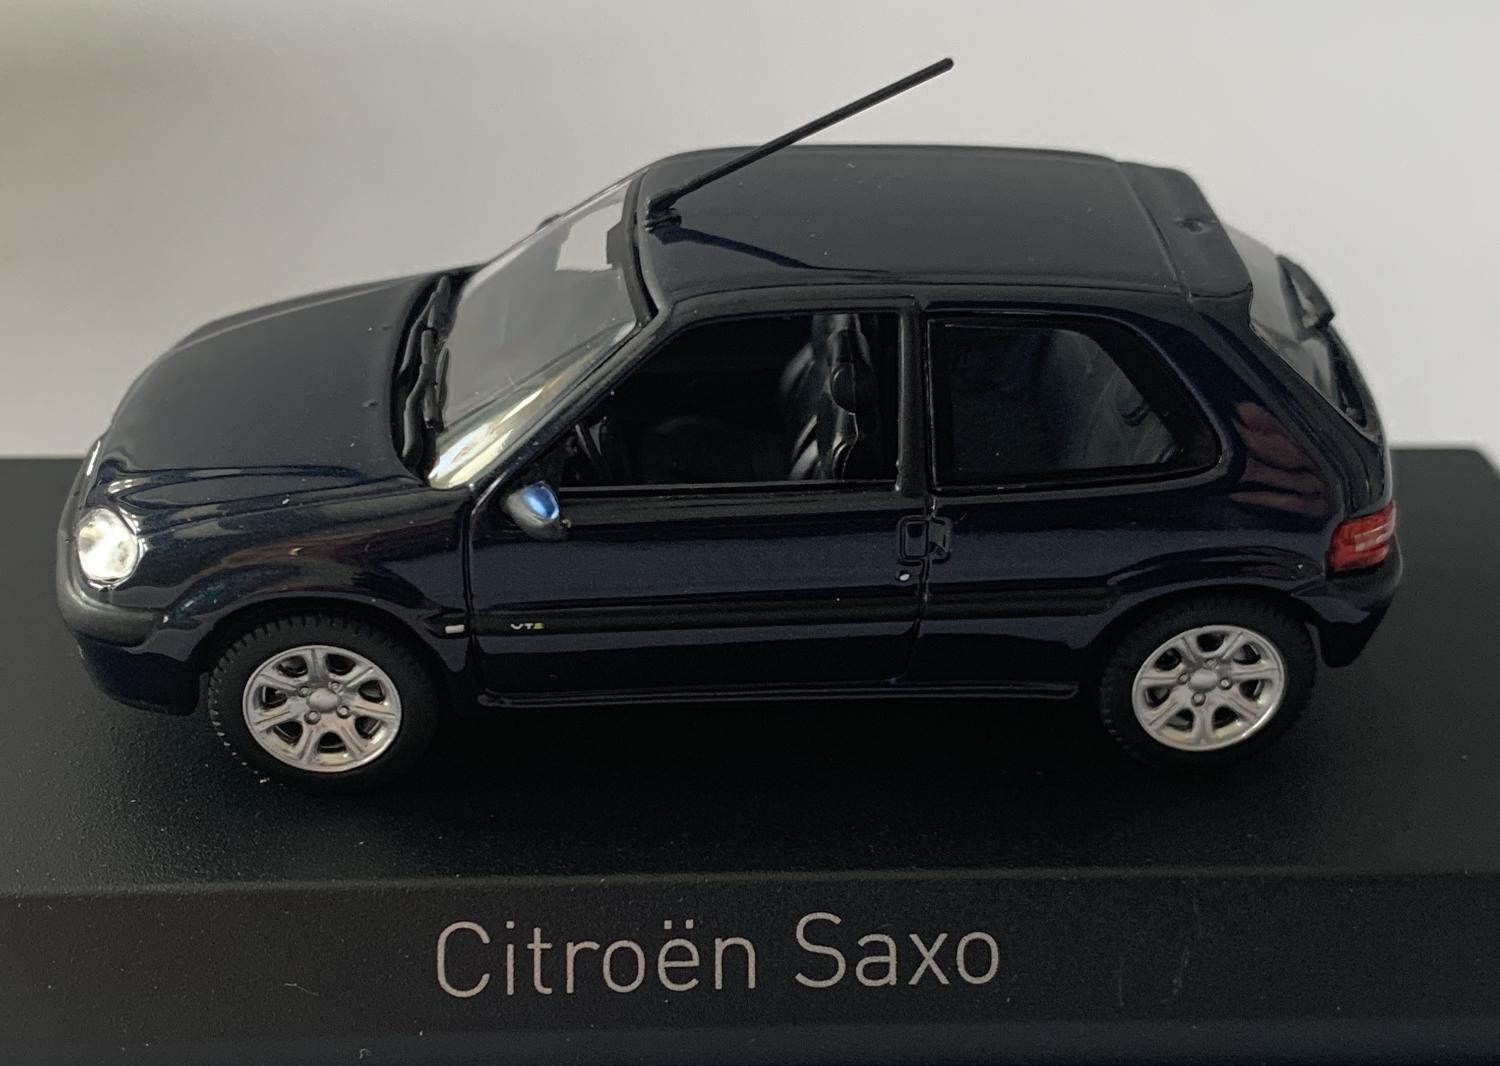 Citroen Saxo VTS, 2000 in Mauritius blue 1:43 scale model from Norev, 155158